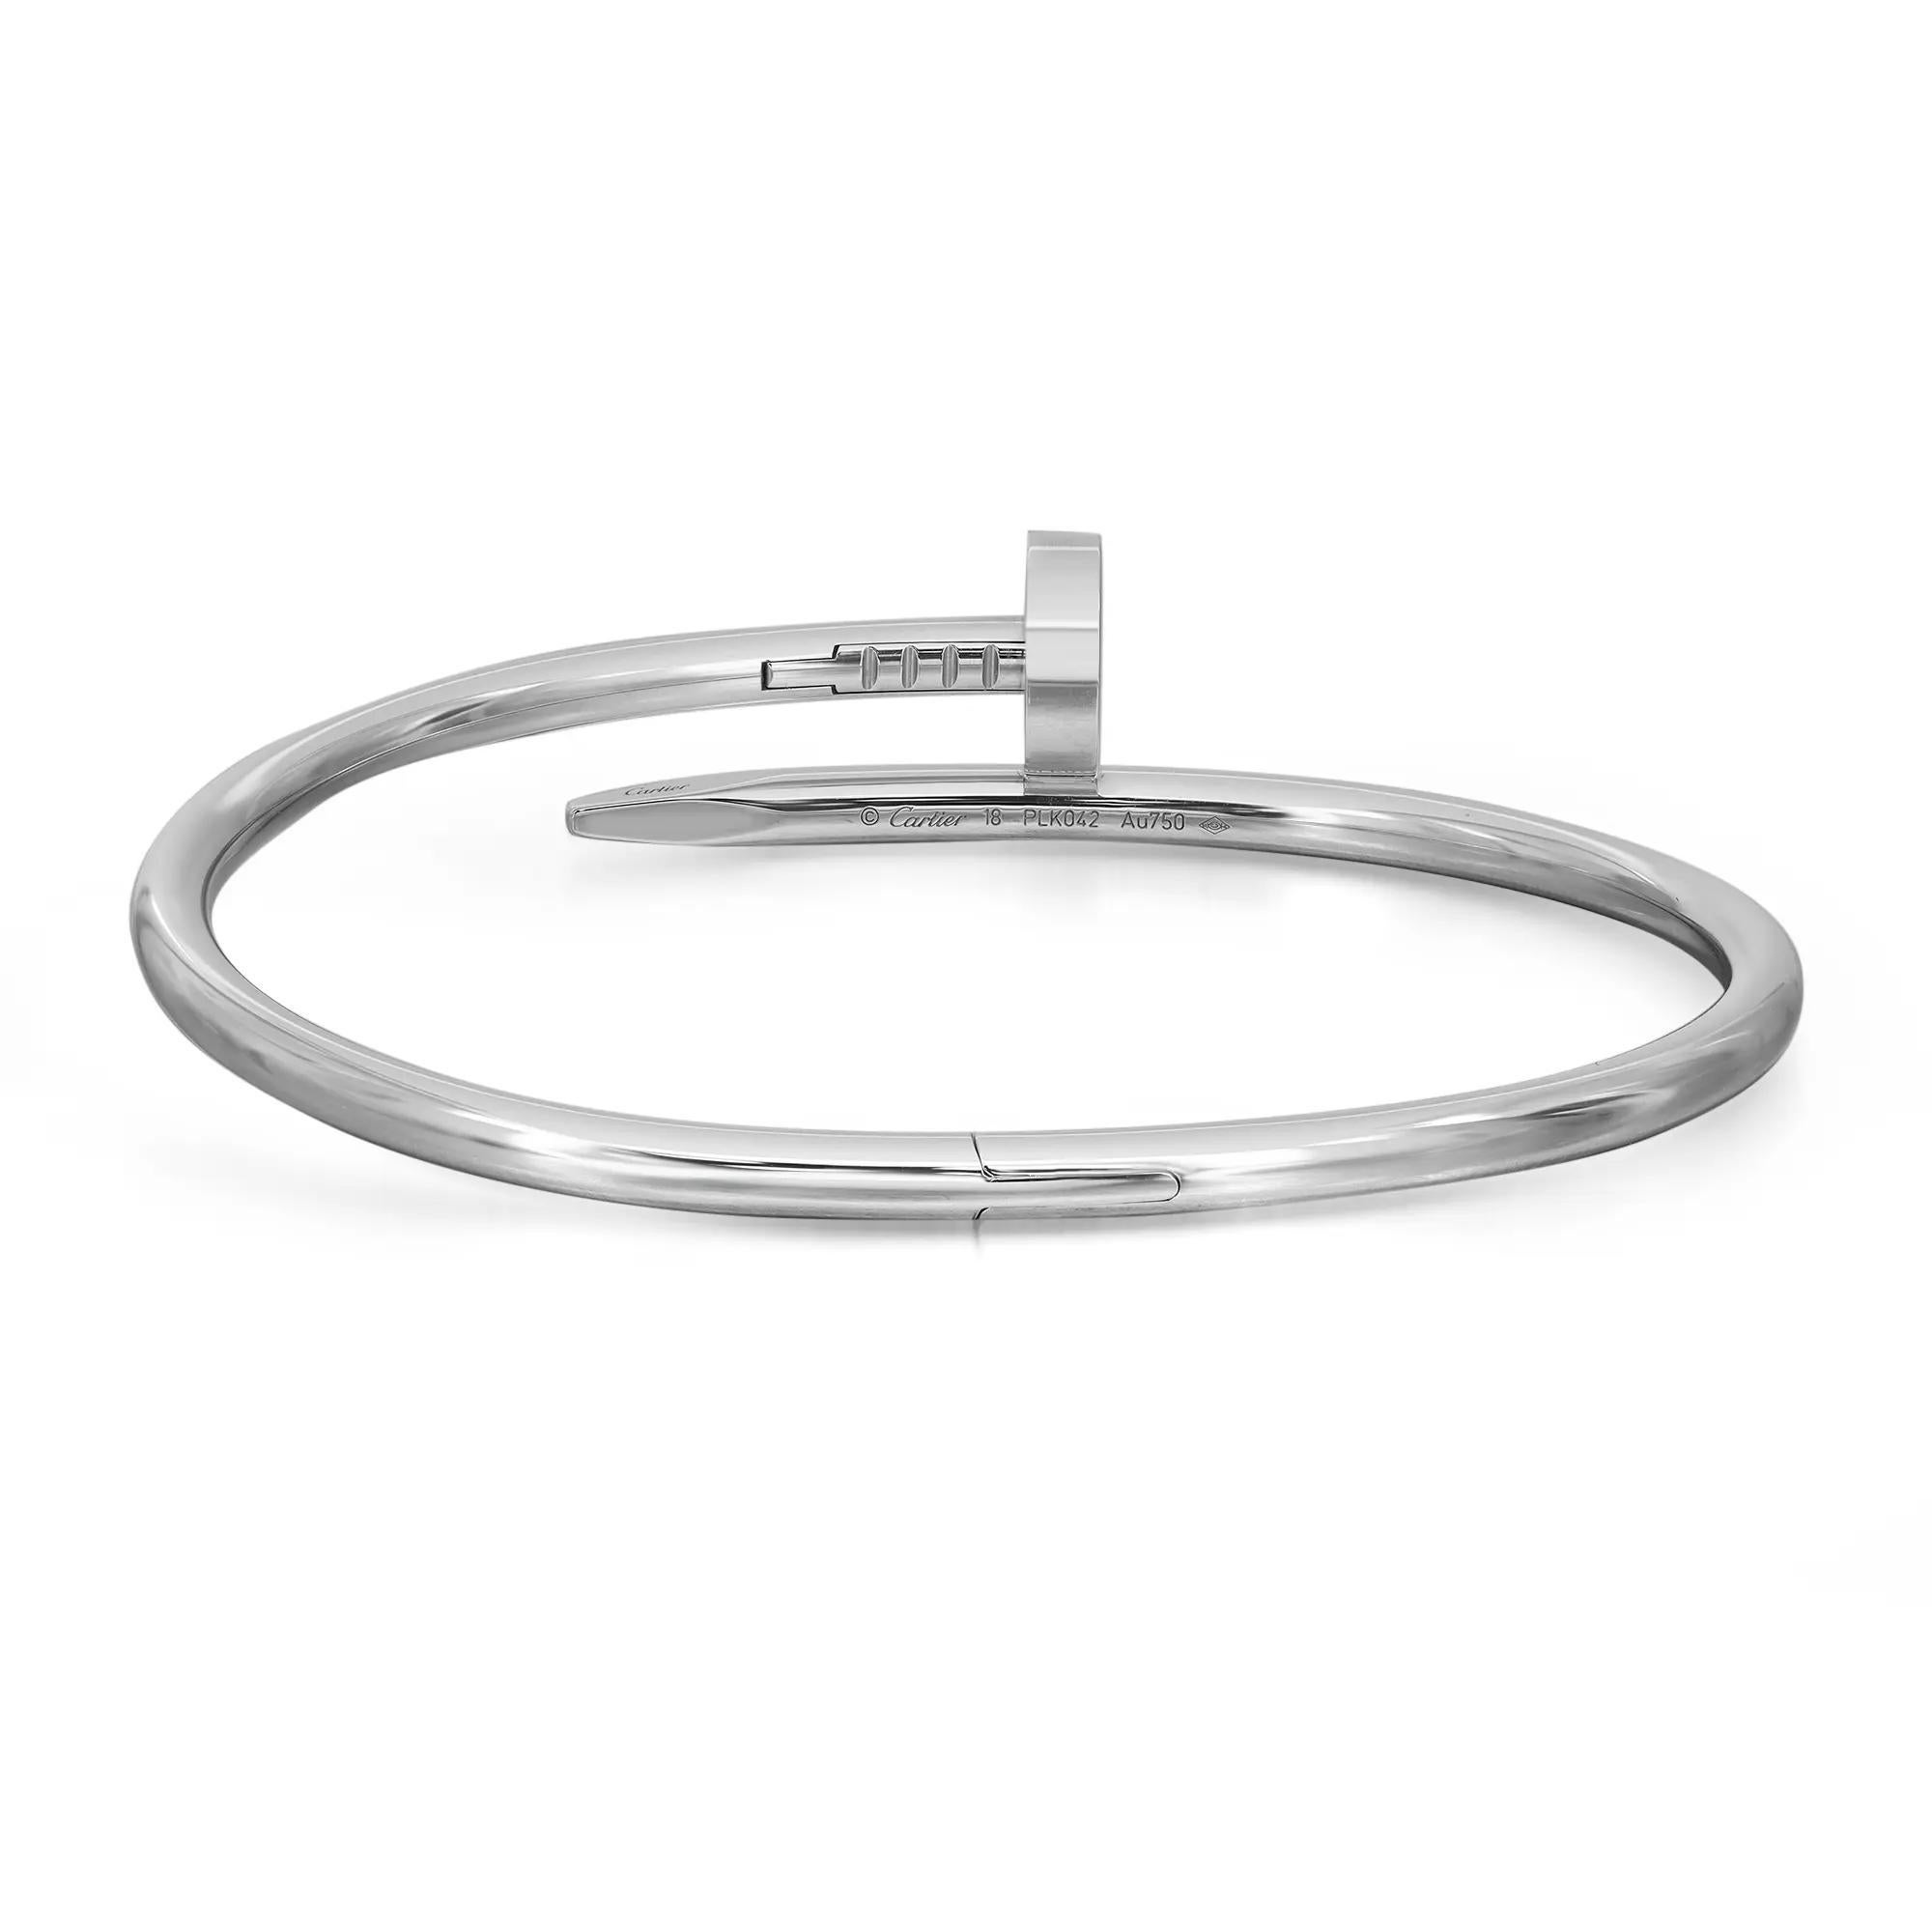 Cartier Juste un Clou bracelet, classic, 18K white gold, rhodium finish. Size 18. Width: 3.5mm. Total weight: 36.04 grams. Excellent pre-owned condition, gently used. Comes with the original box and certificate. 